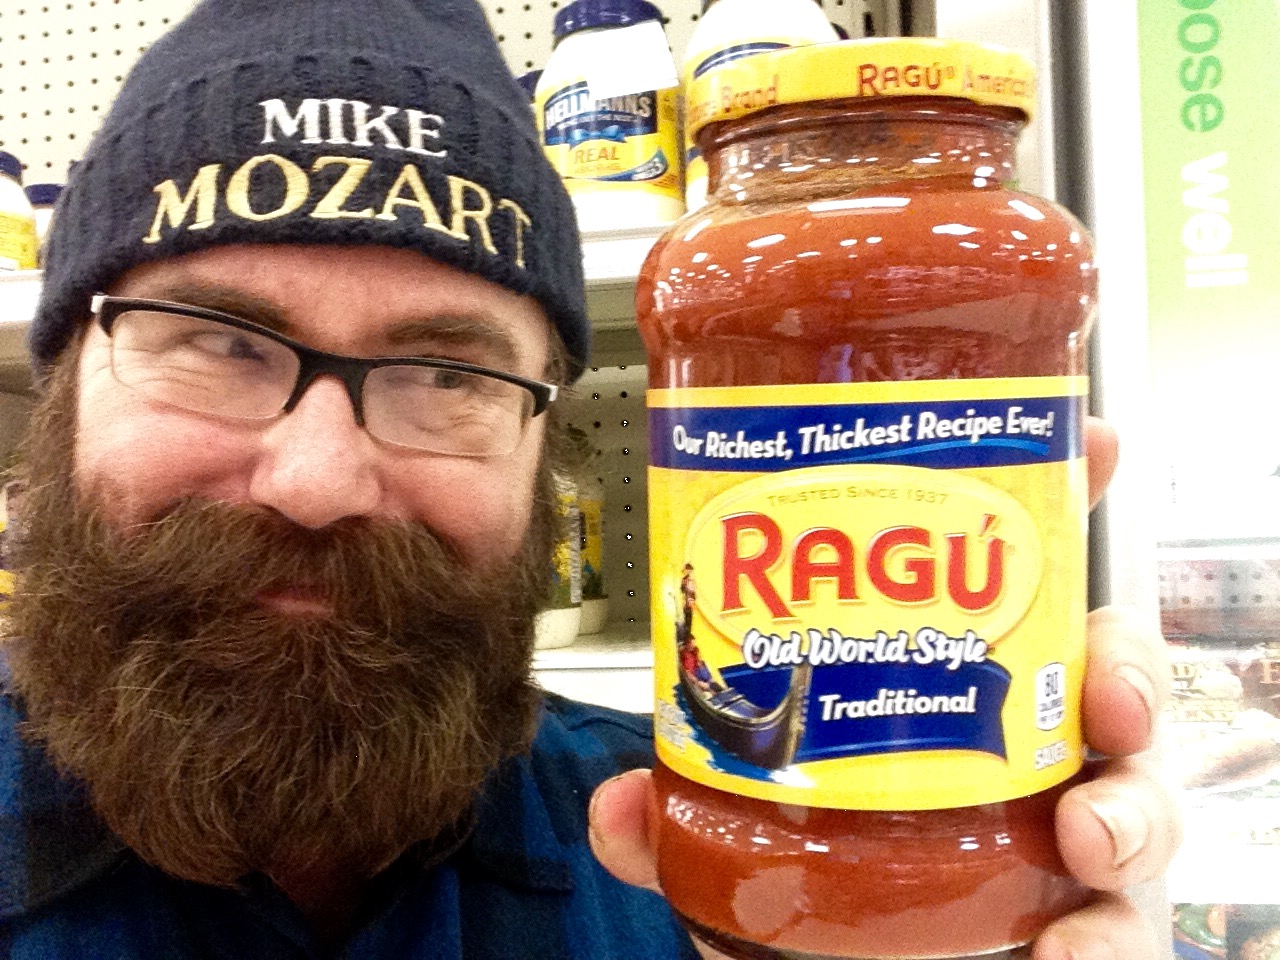 the bearded man holding the jar of tasty looking food